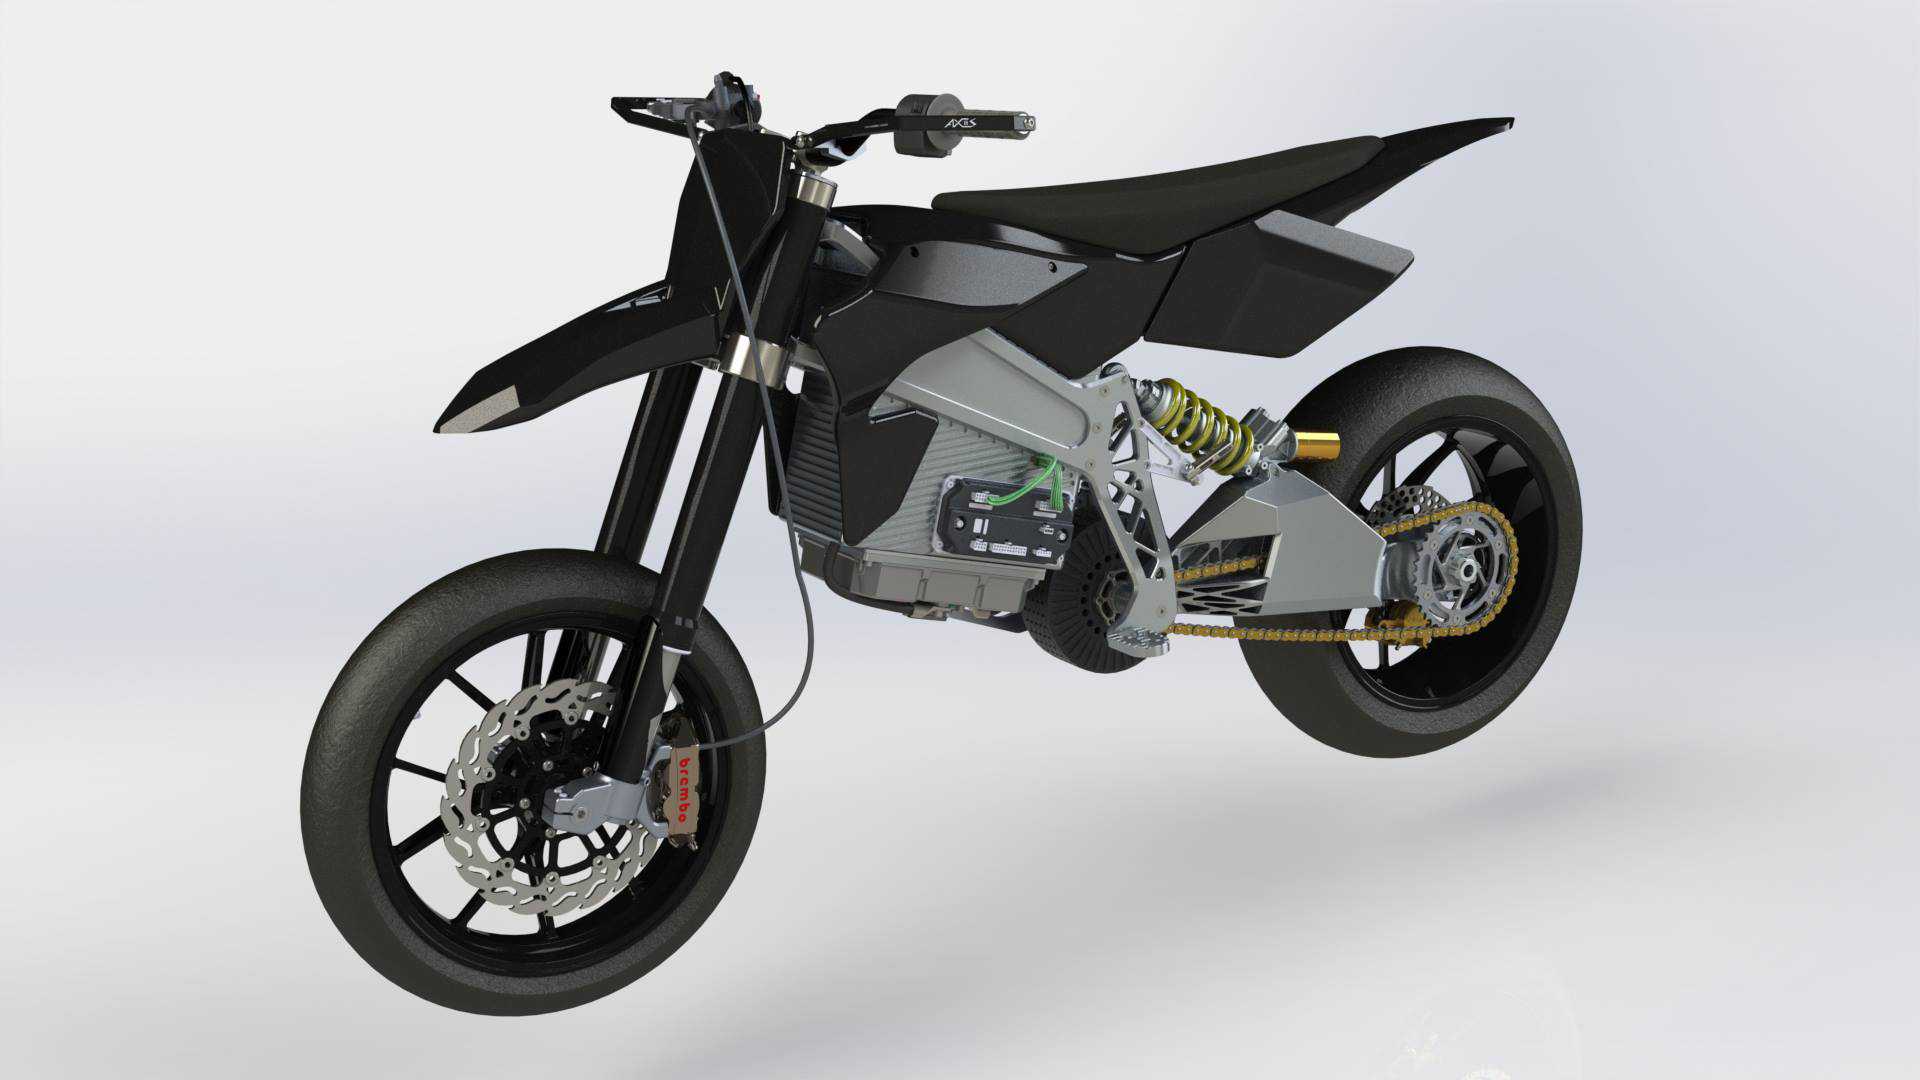 Liion is an electric supermoto from Axiis